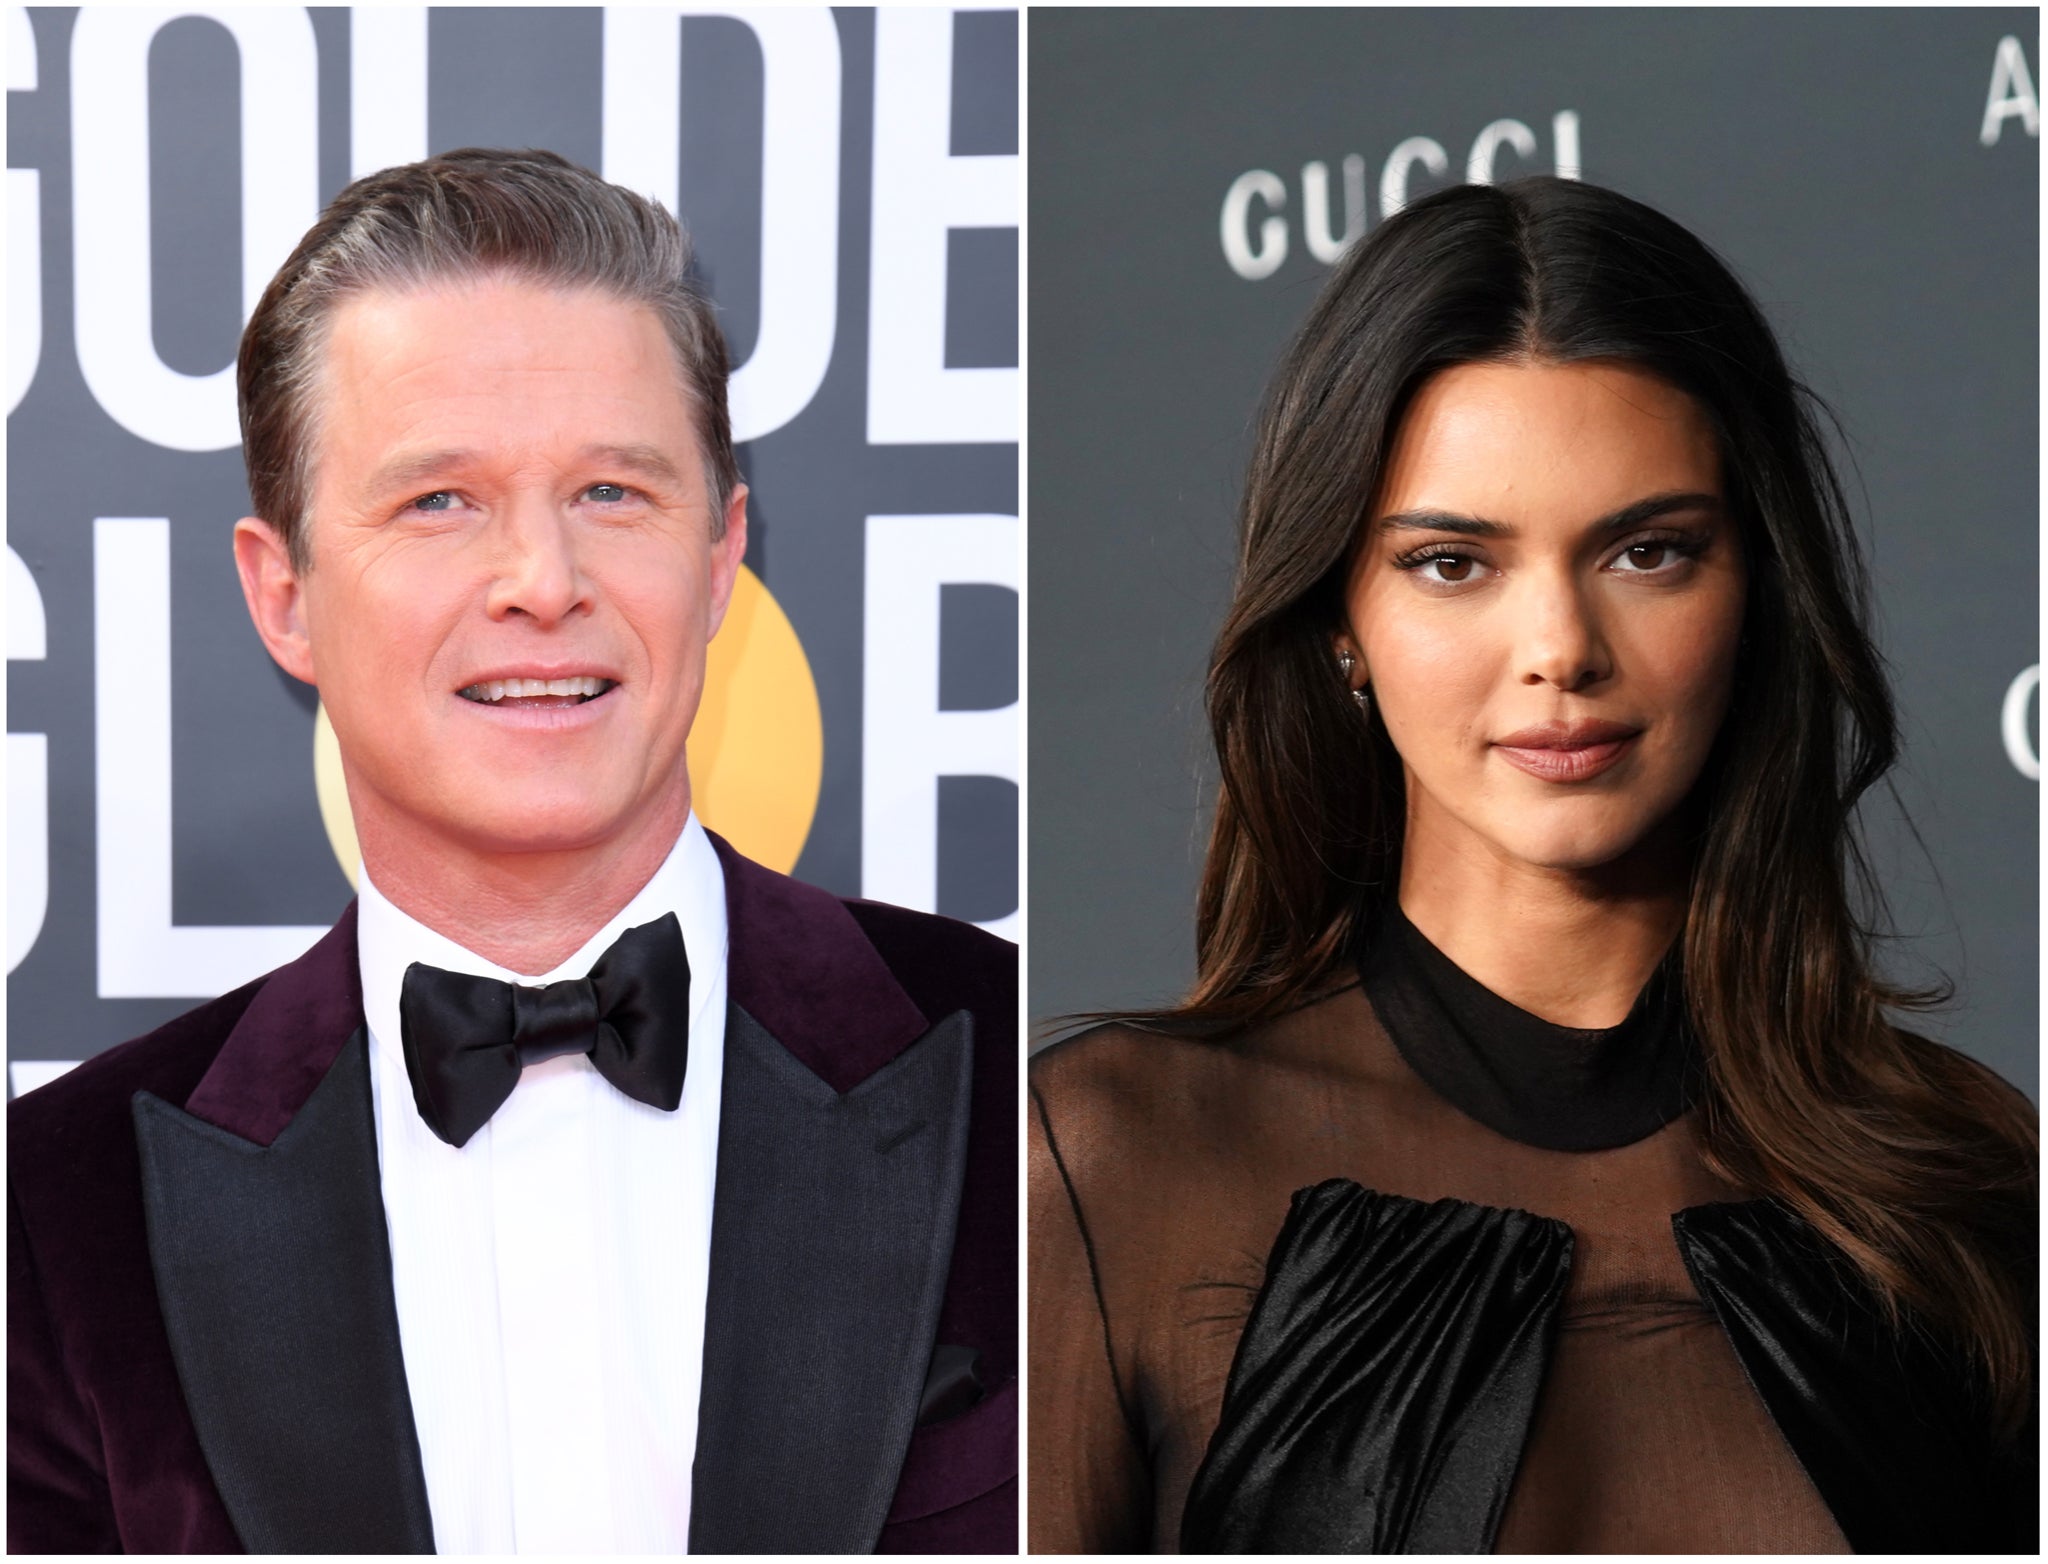 Billy Bush (left) and Kendall Jenner